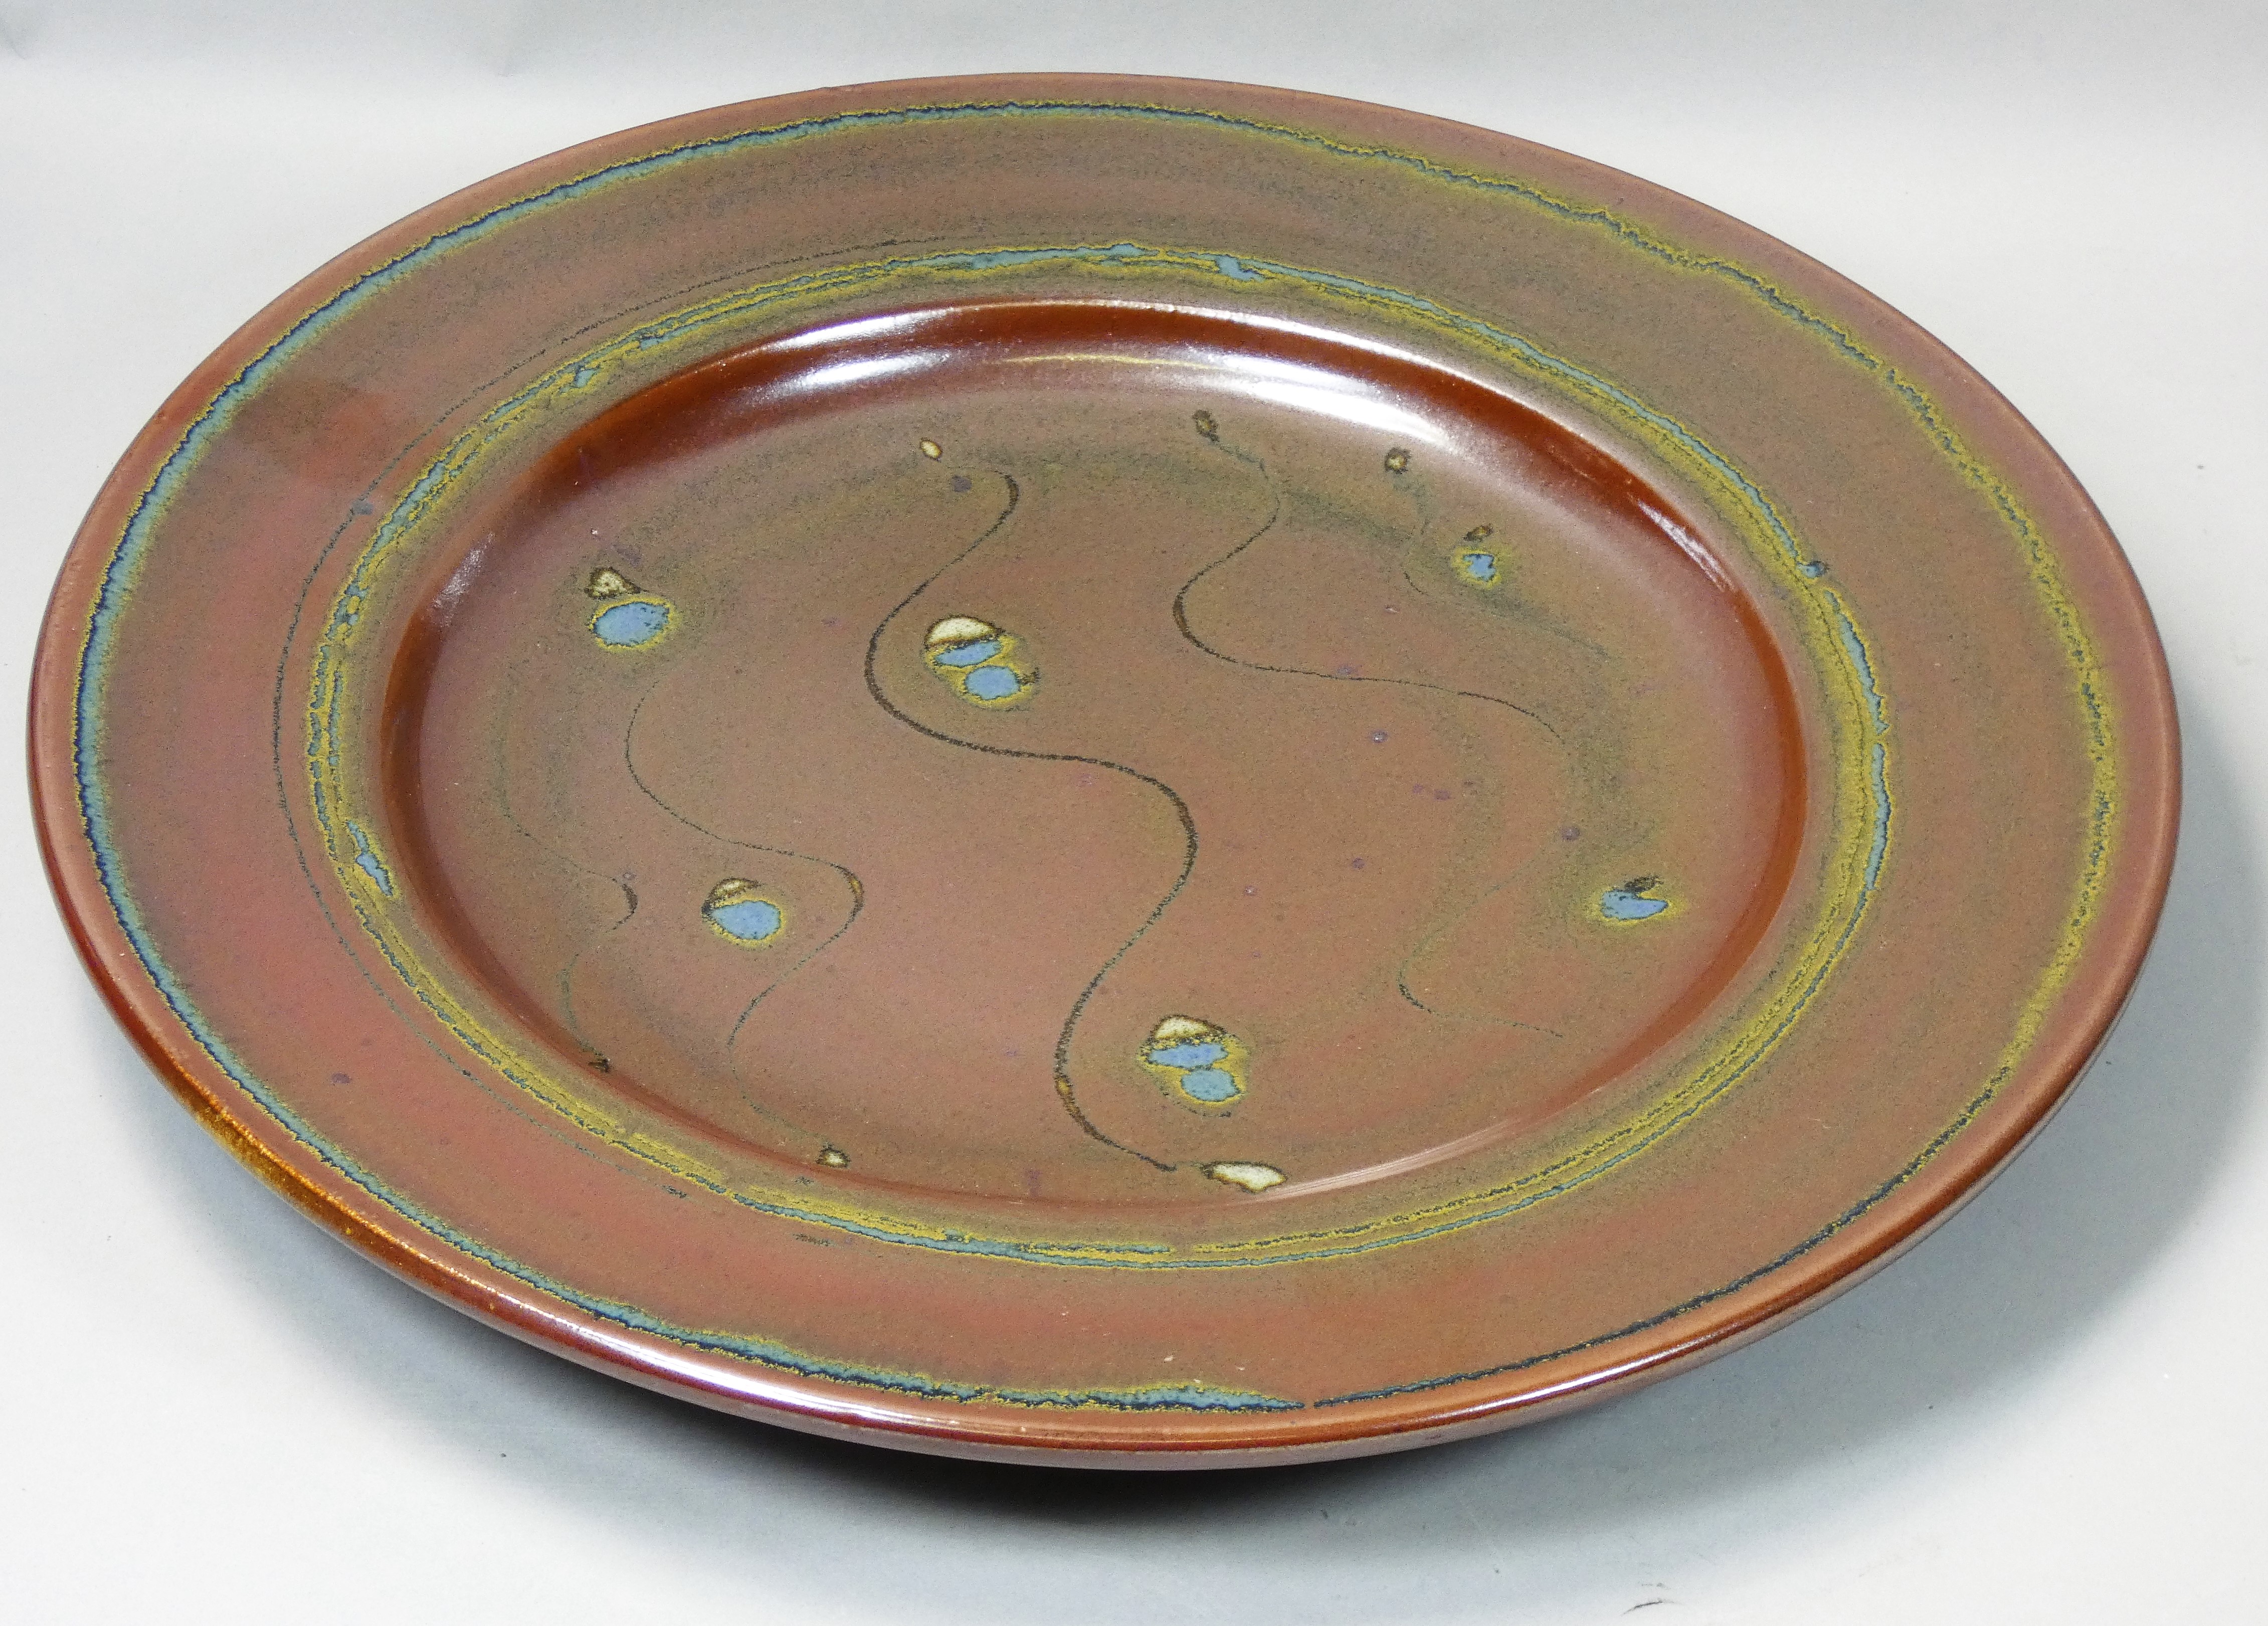 Ray Finch (1914 - 2012), a large wood fired stoneware platter for Winchcombe Pottery, decorated with